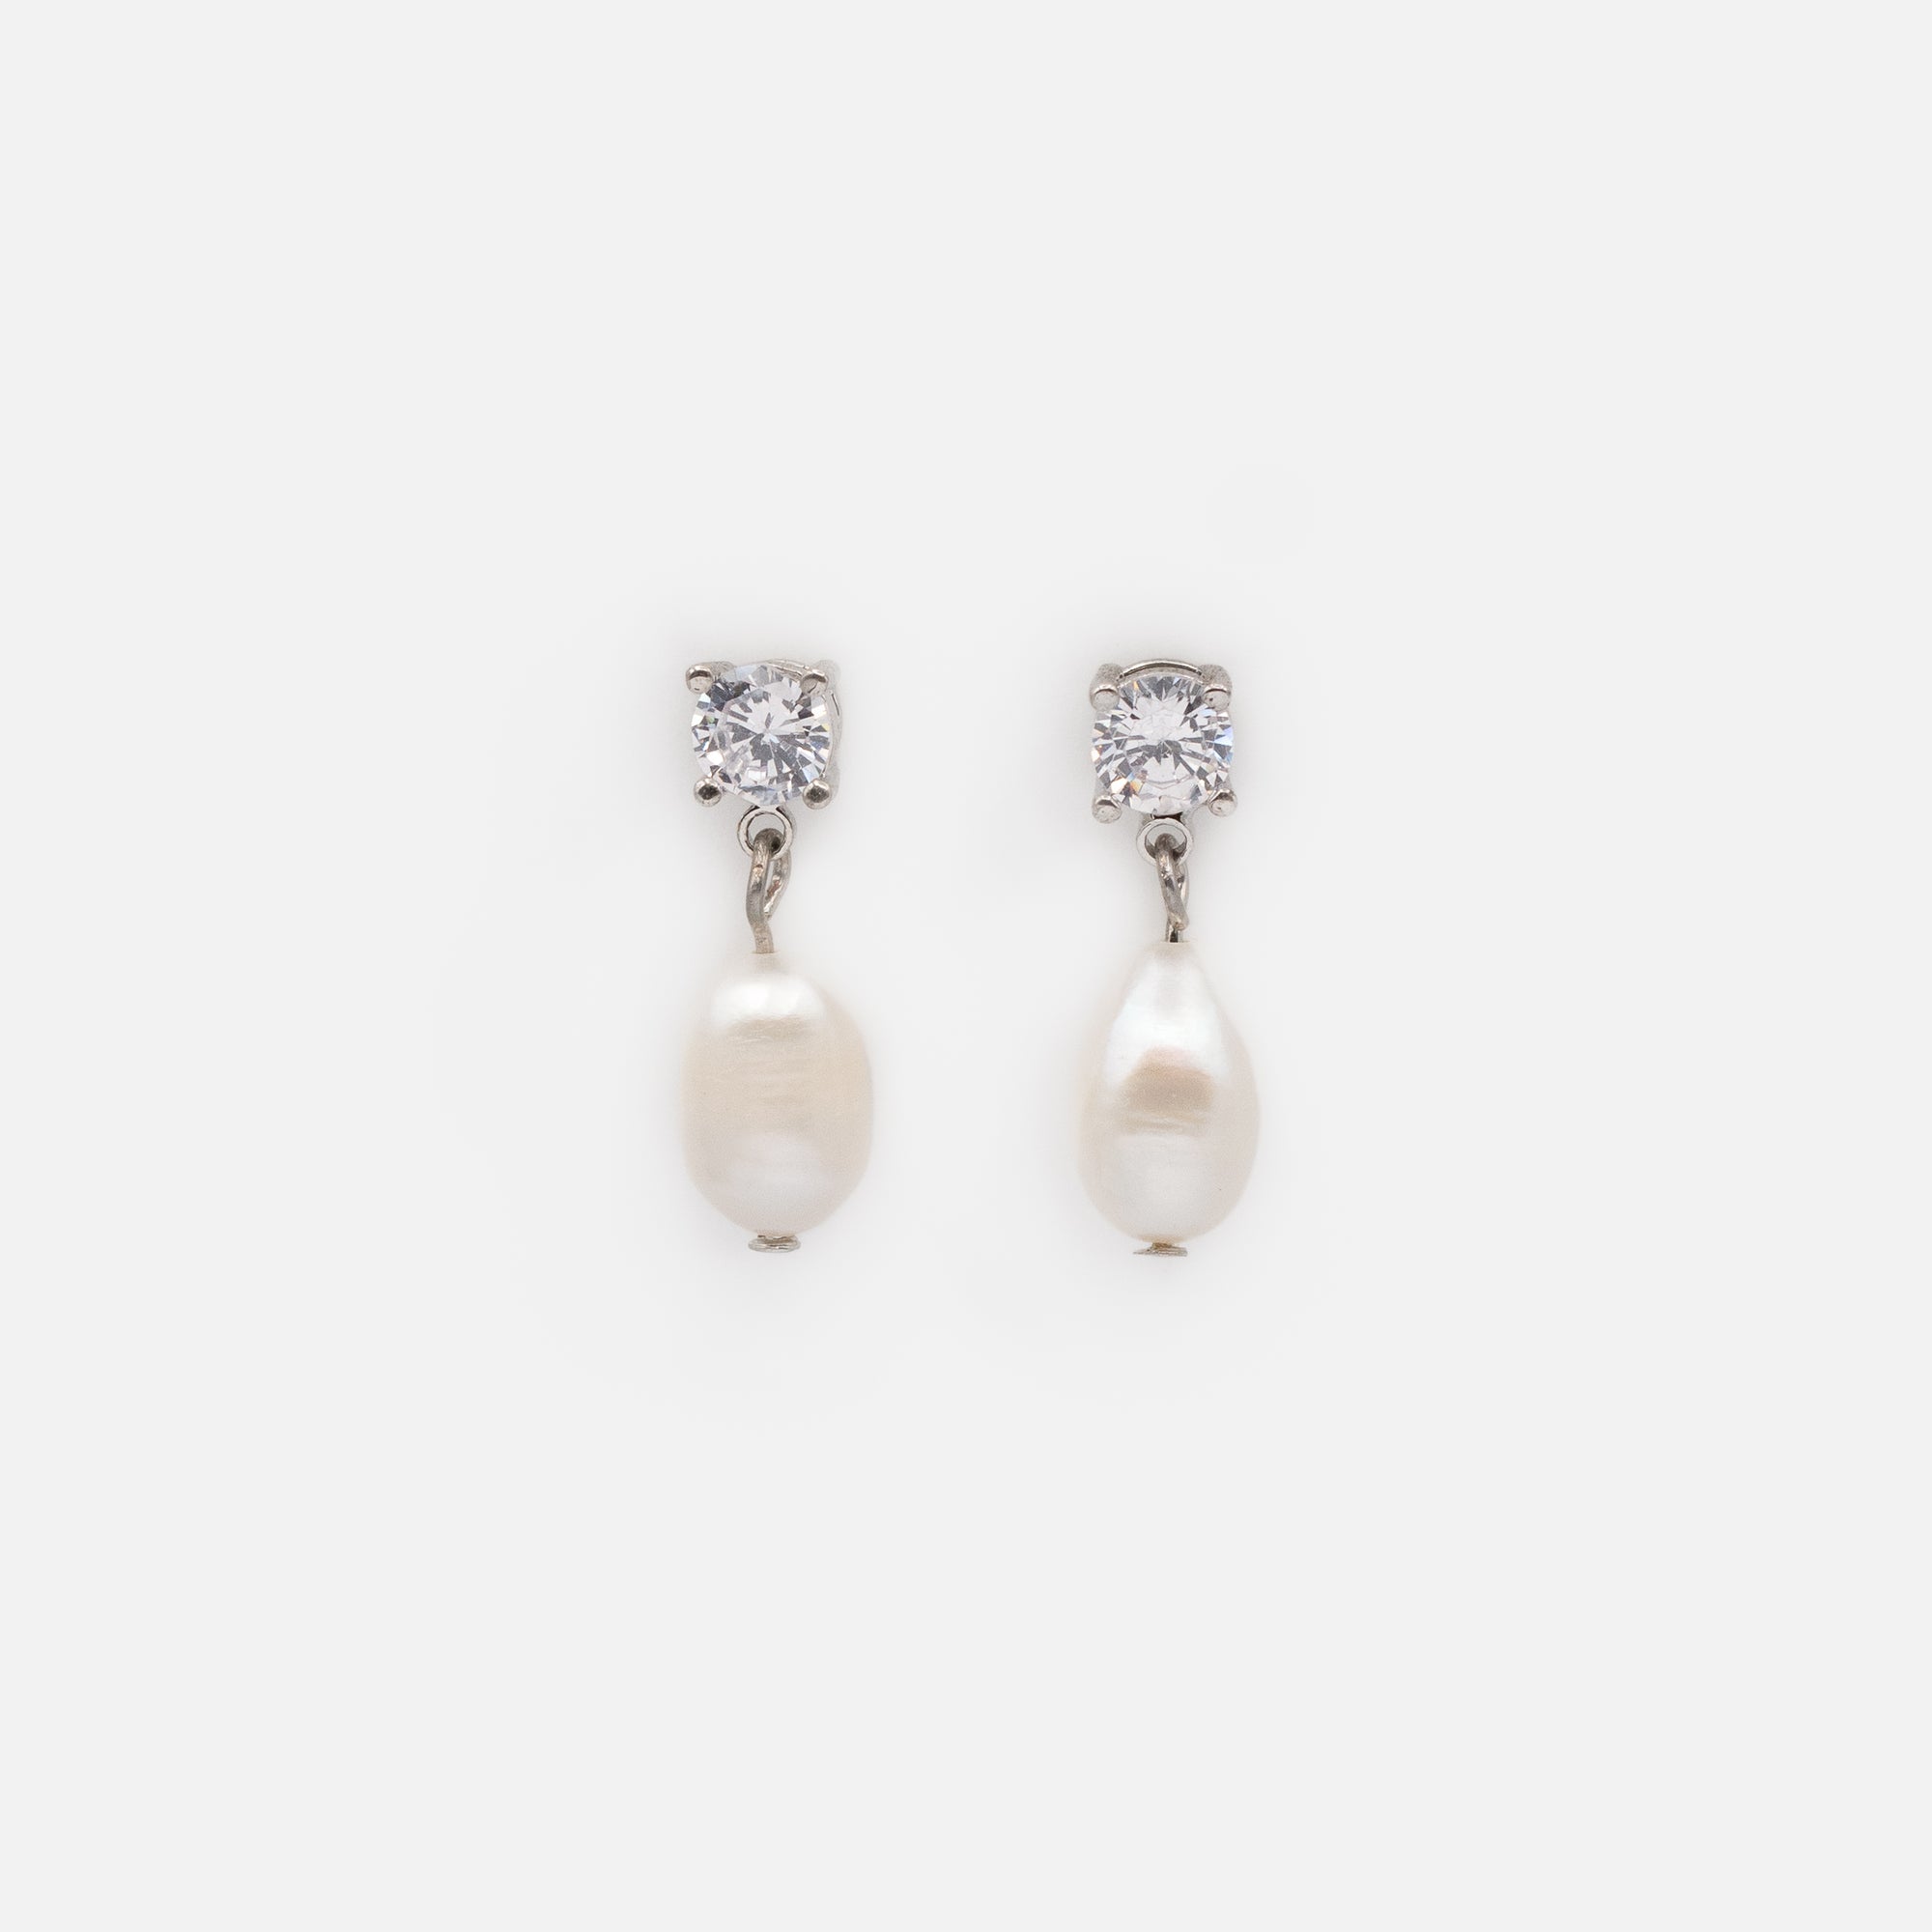 Earrings with stone and pearl